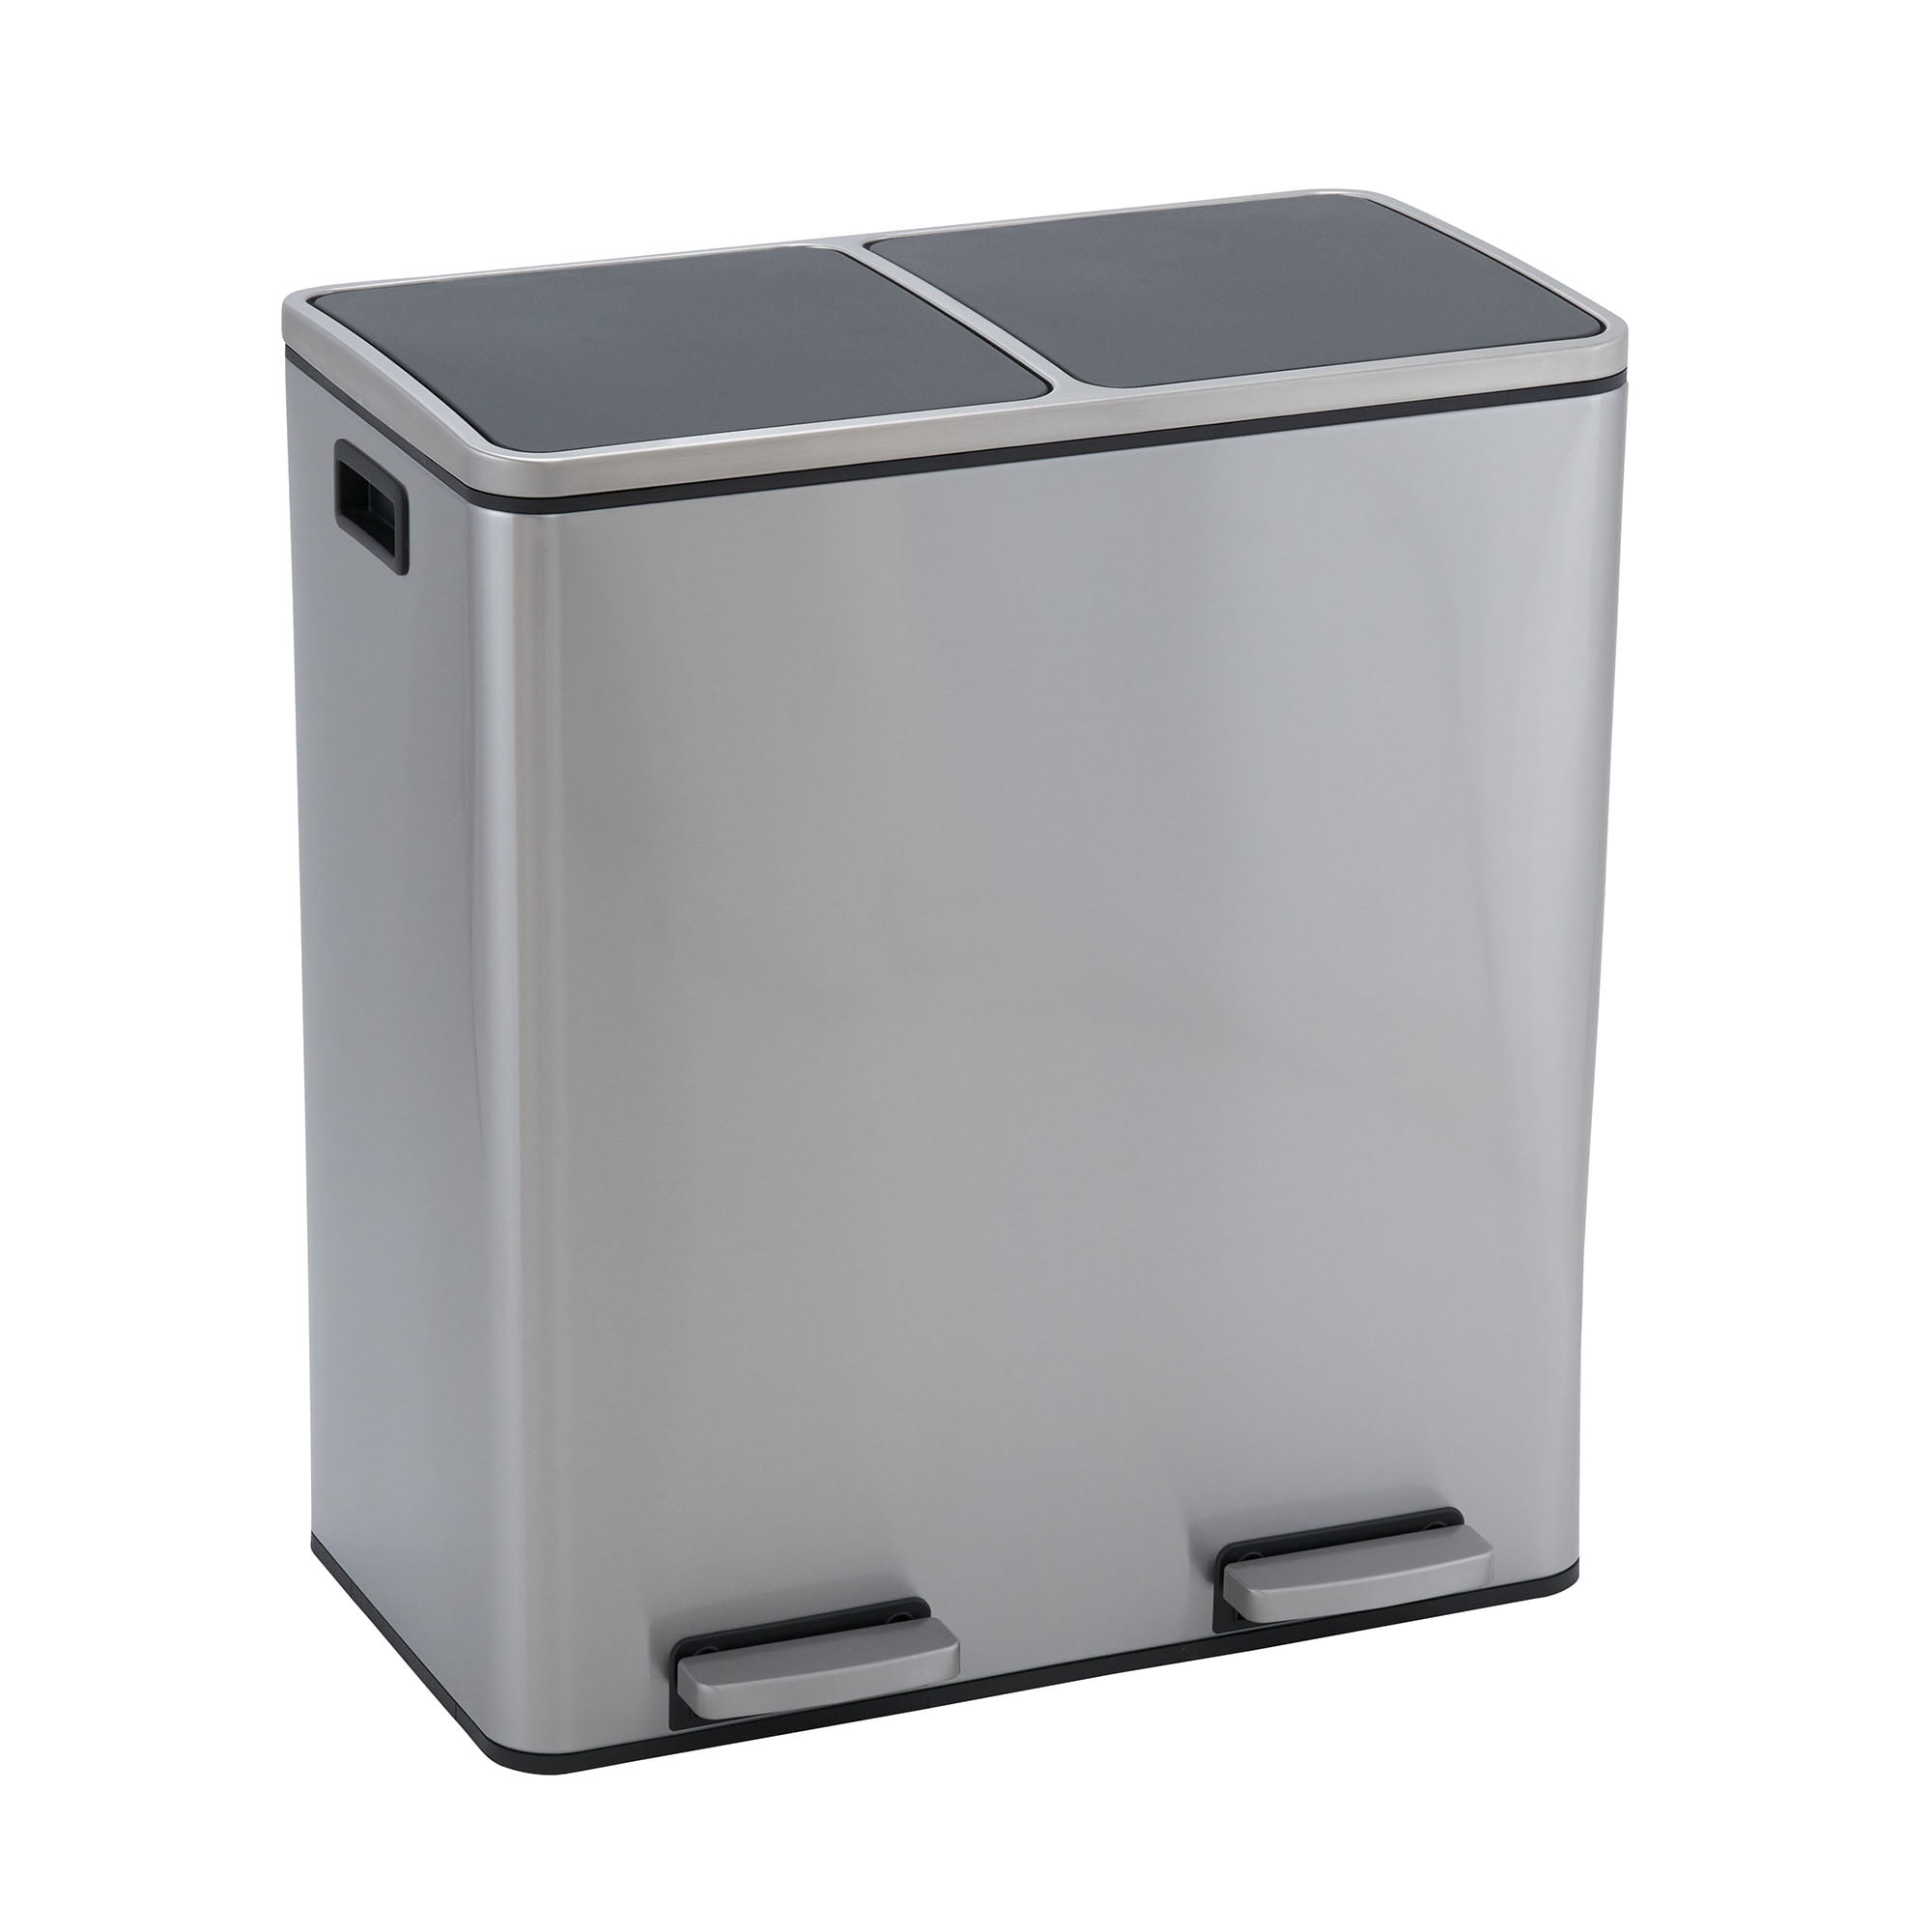 Design Trend 30 Liter / 8 Gallon Dual Compartments Stainless Steel Step Stainless Steel Step On Trash Can